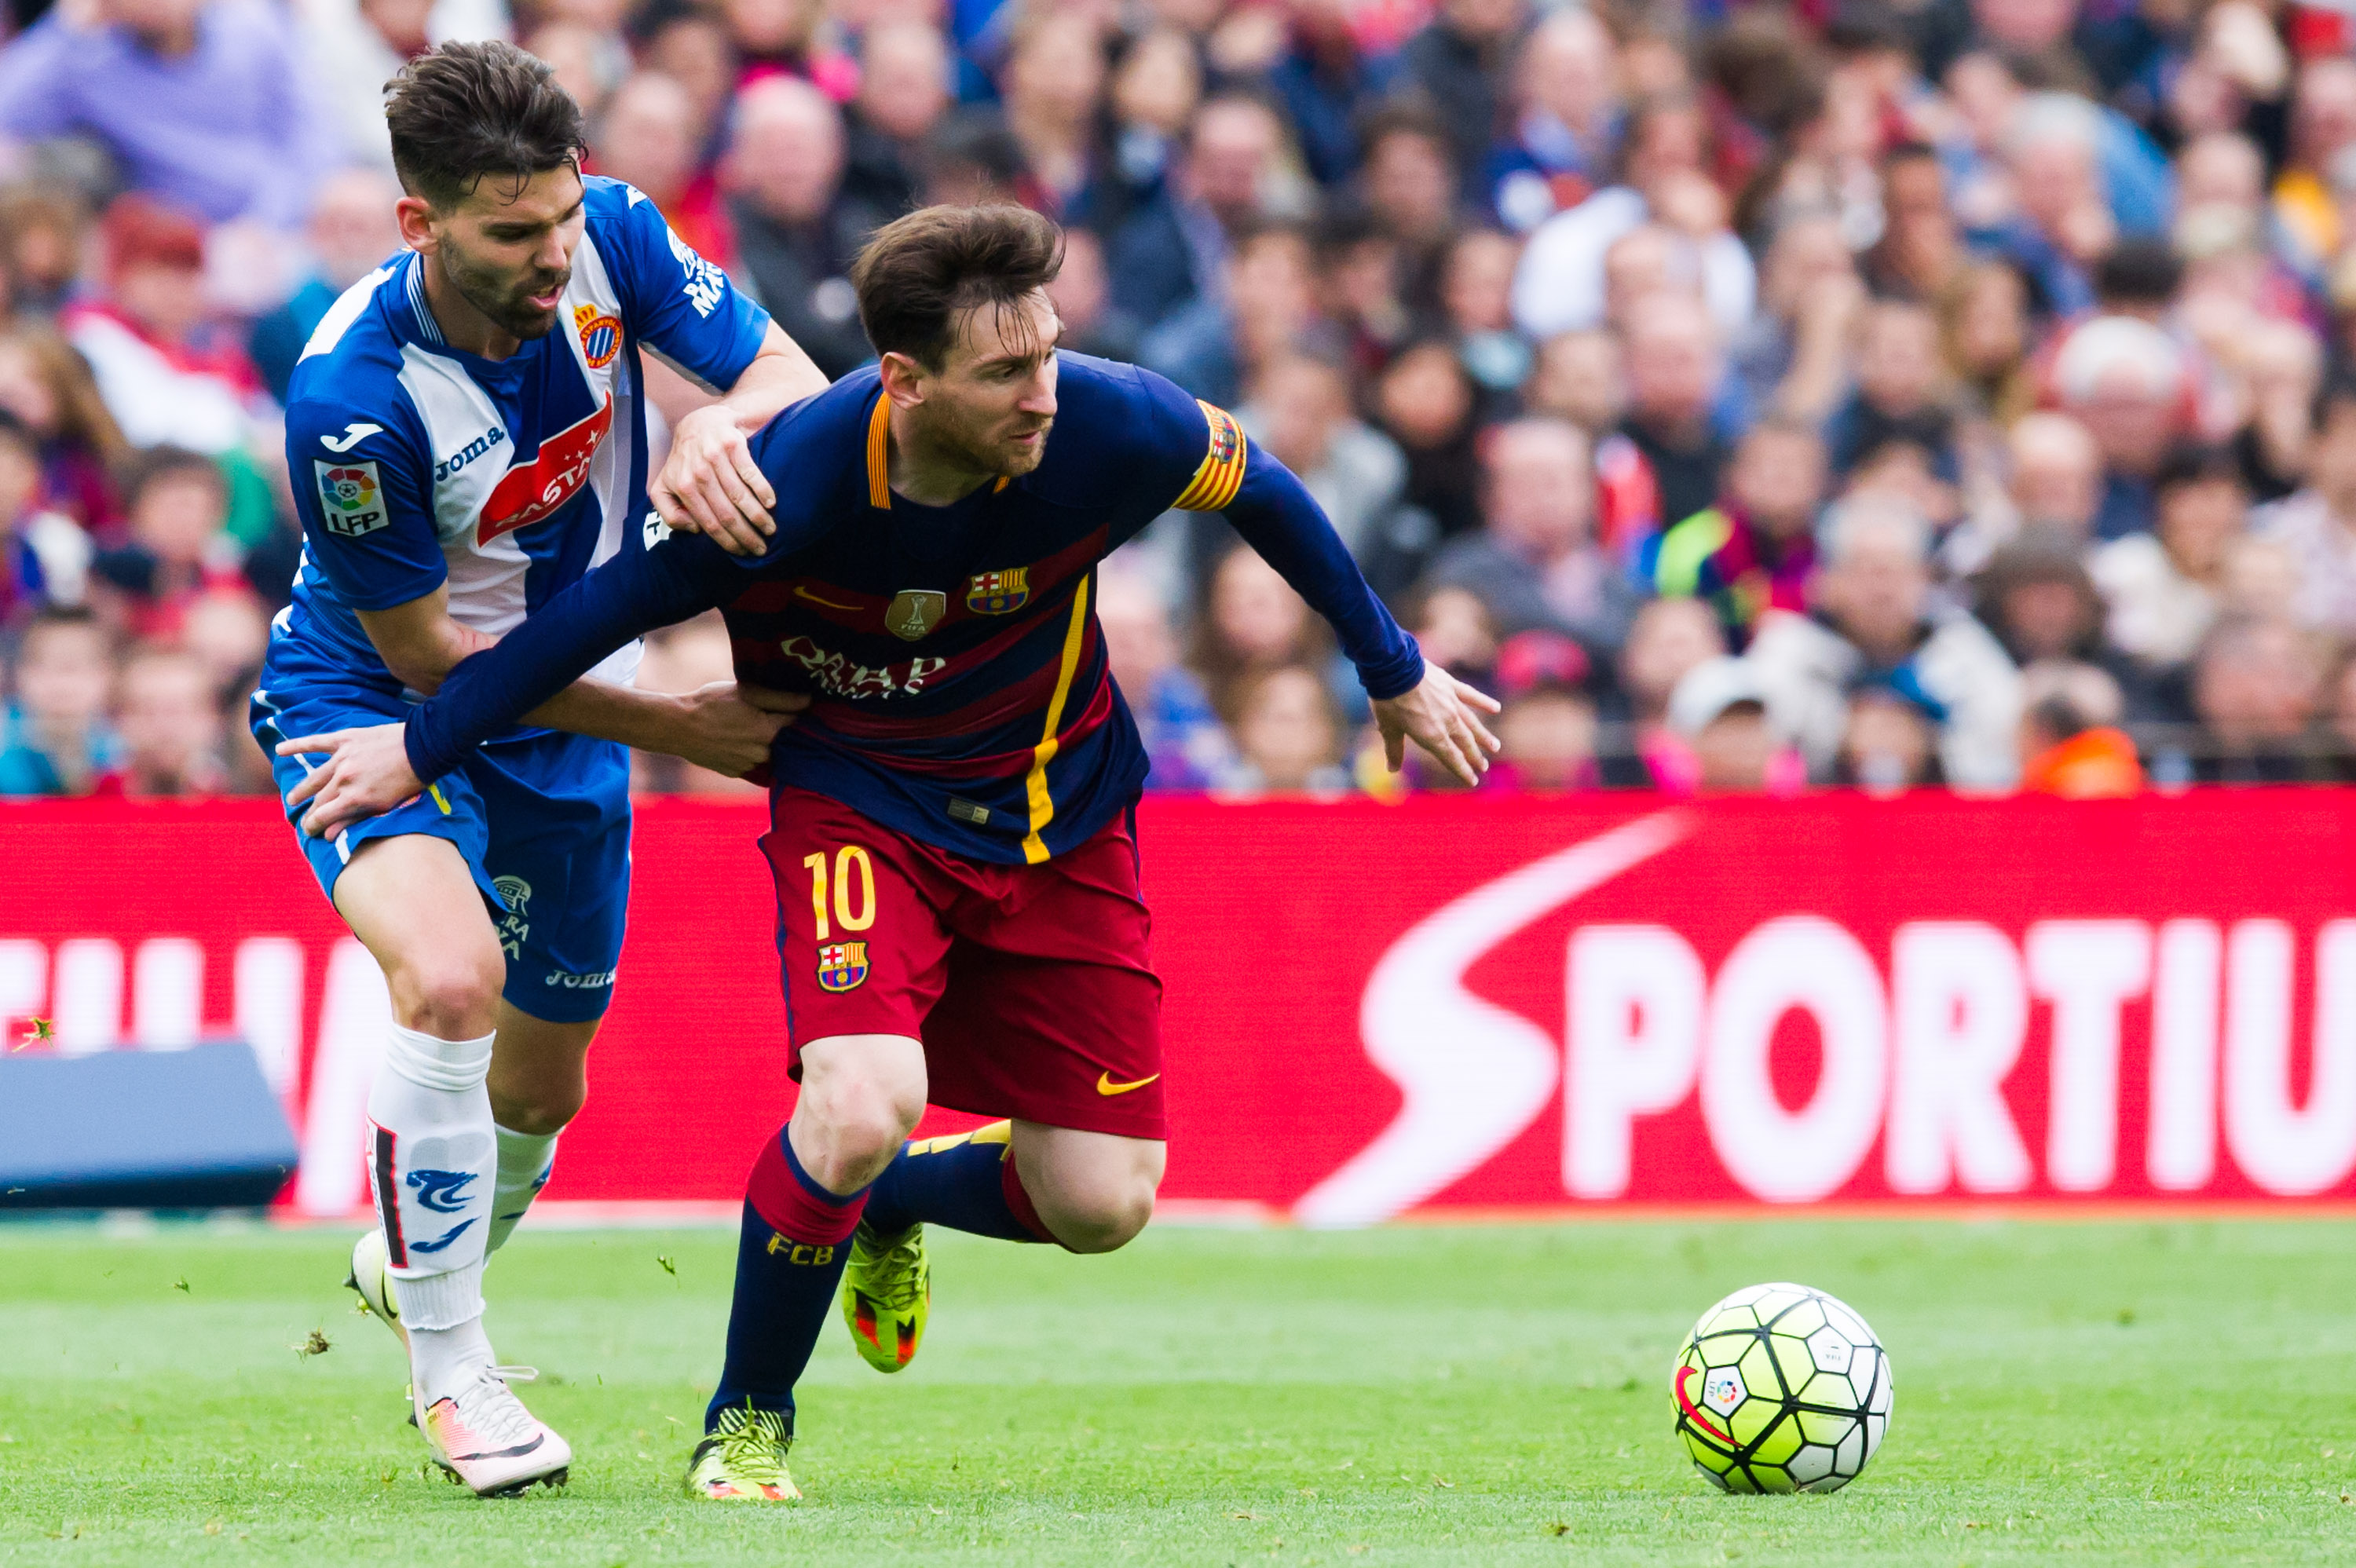 BARCELONA, SPAIN - MAY 08:  Lionel Messi of FC Barcelona protects the ball from Victor Alvarez of RCD Espanyol during the La Liga match between FC Barcelona and RCD Espanyol at Camp Nou on May 8, 2016 in Barcelona, Spain.  (Photo by Alex Caparros/Getty Images)